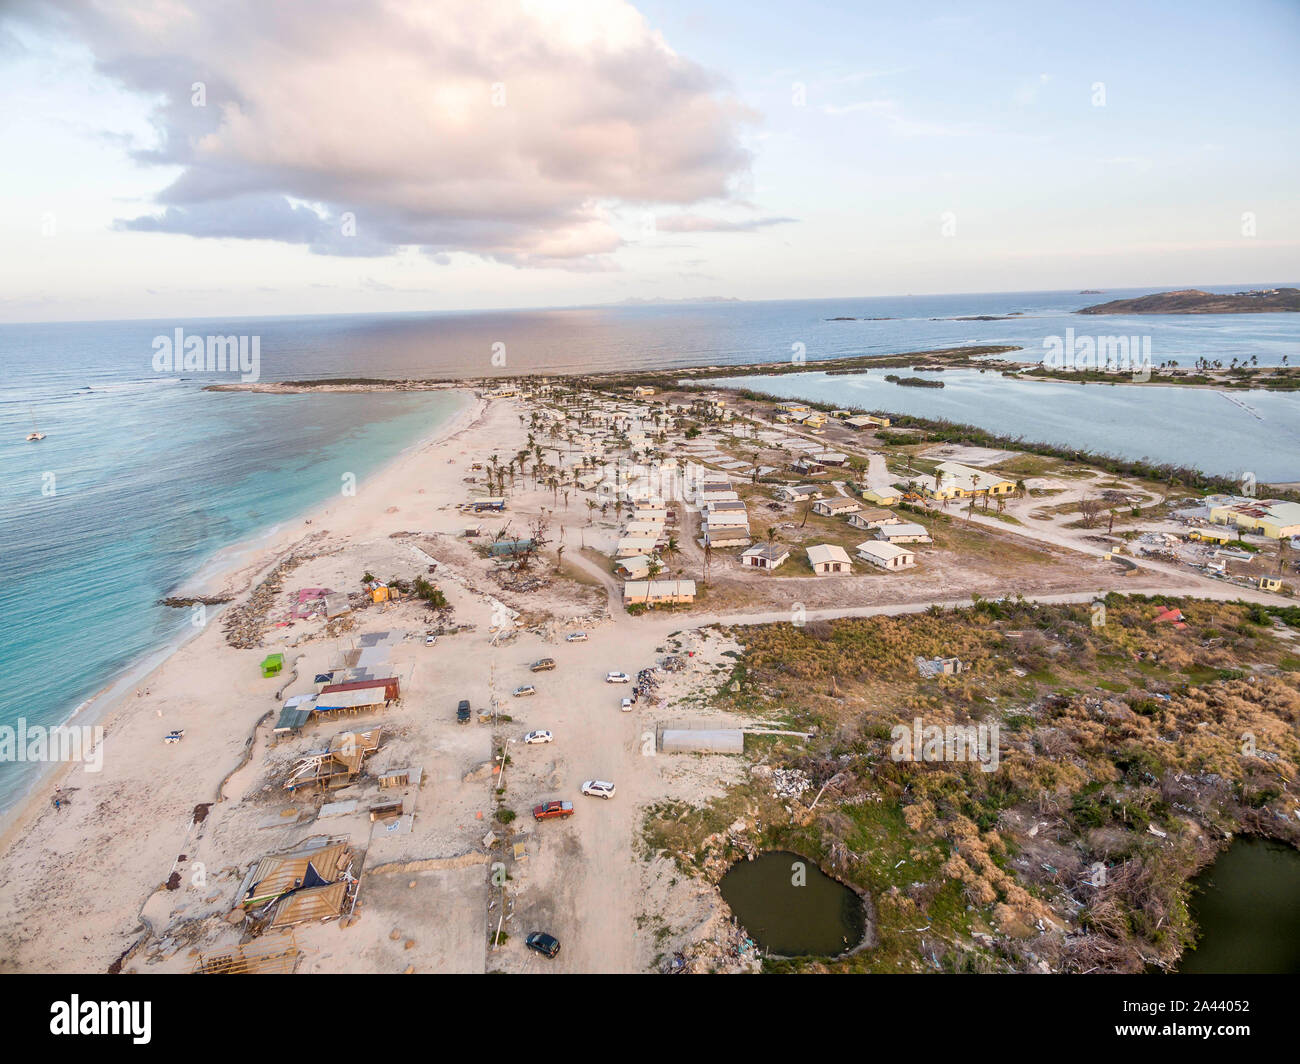 Beautiful view of orient bay beach on st.martin. Aerial view after getting damage by hurricane Irma. Stock Photo